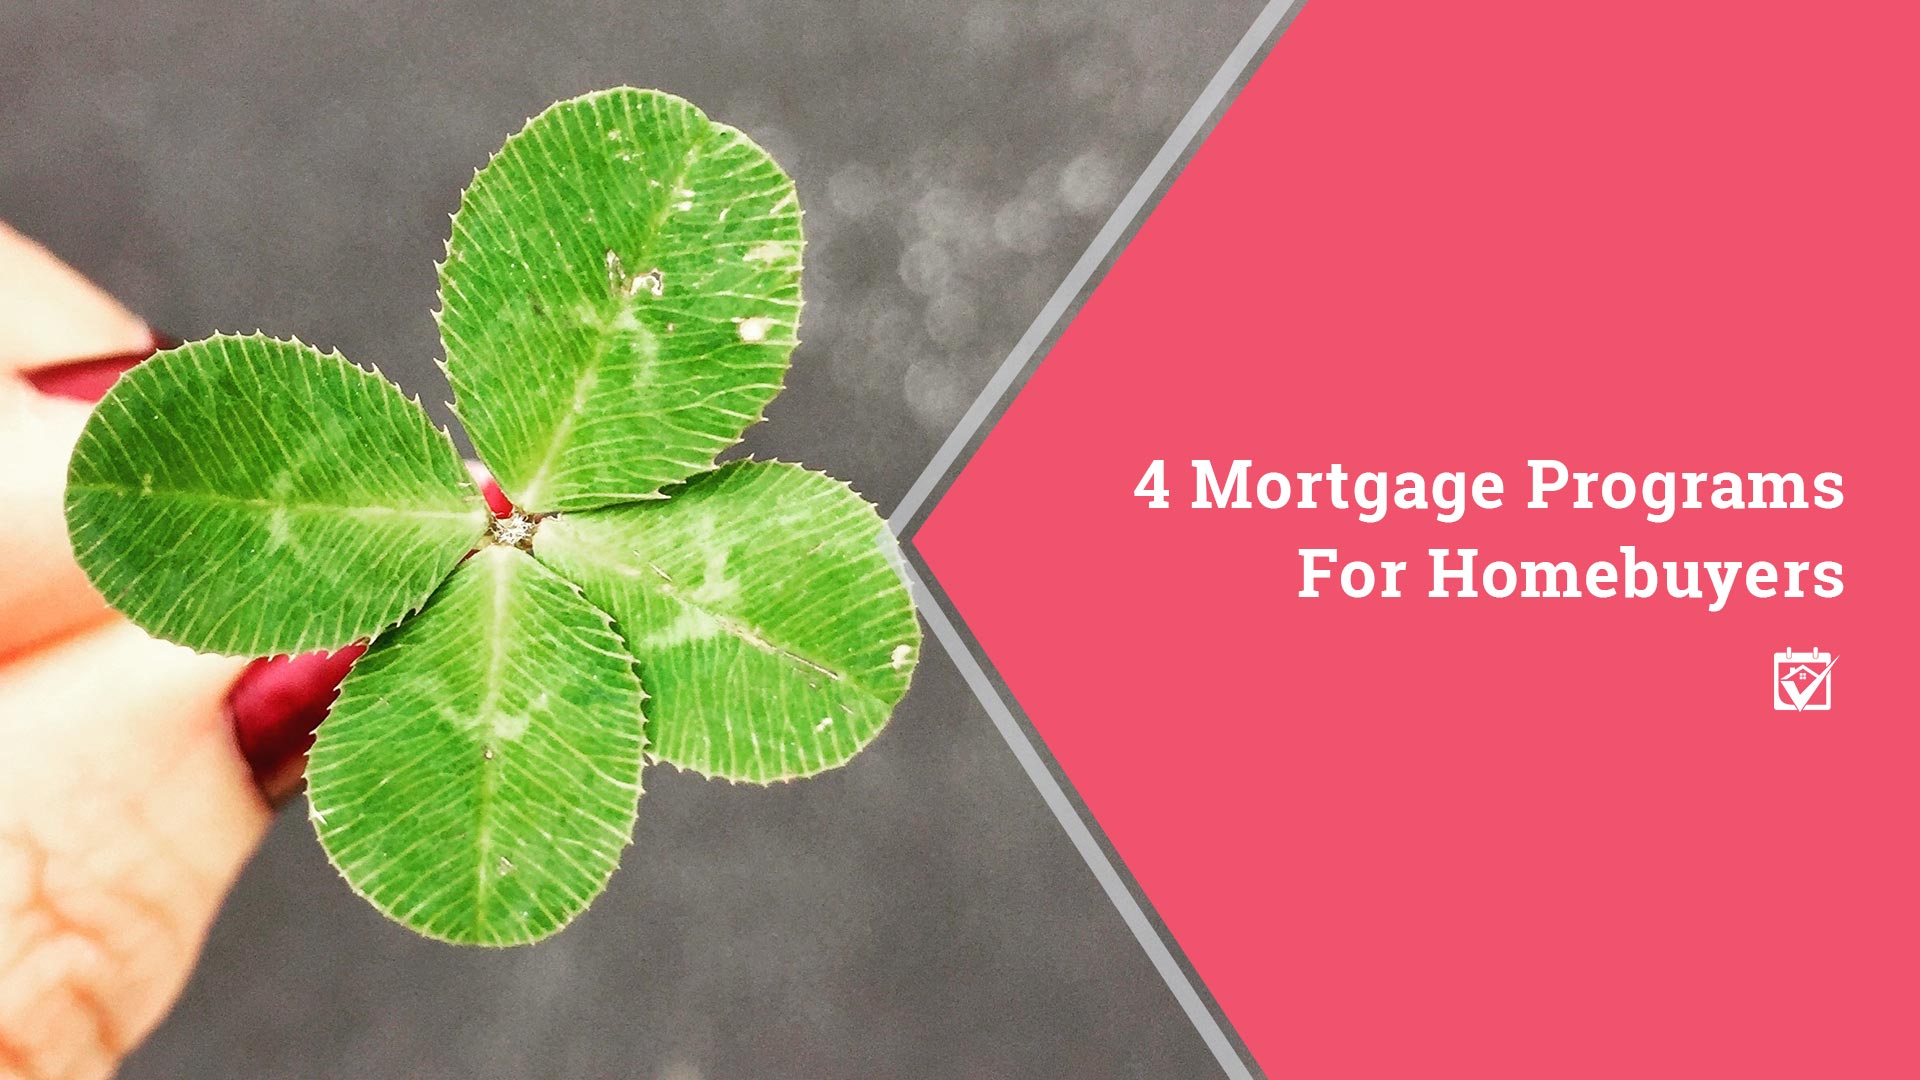 4 Mortgage Programs For Homebuyers